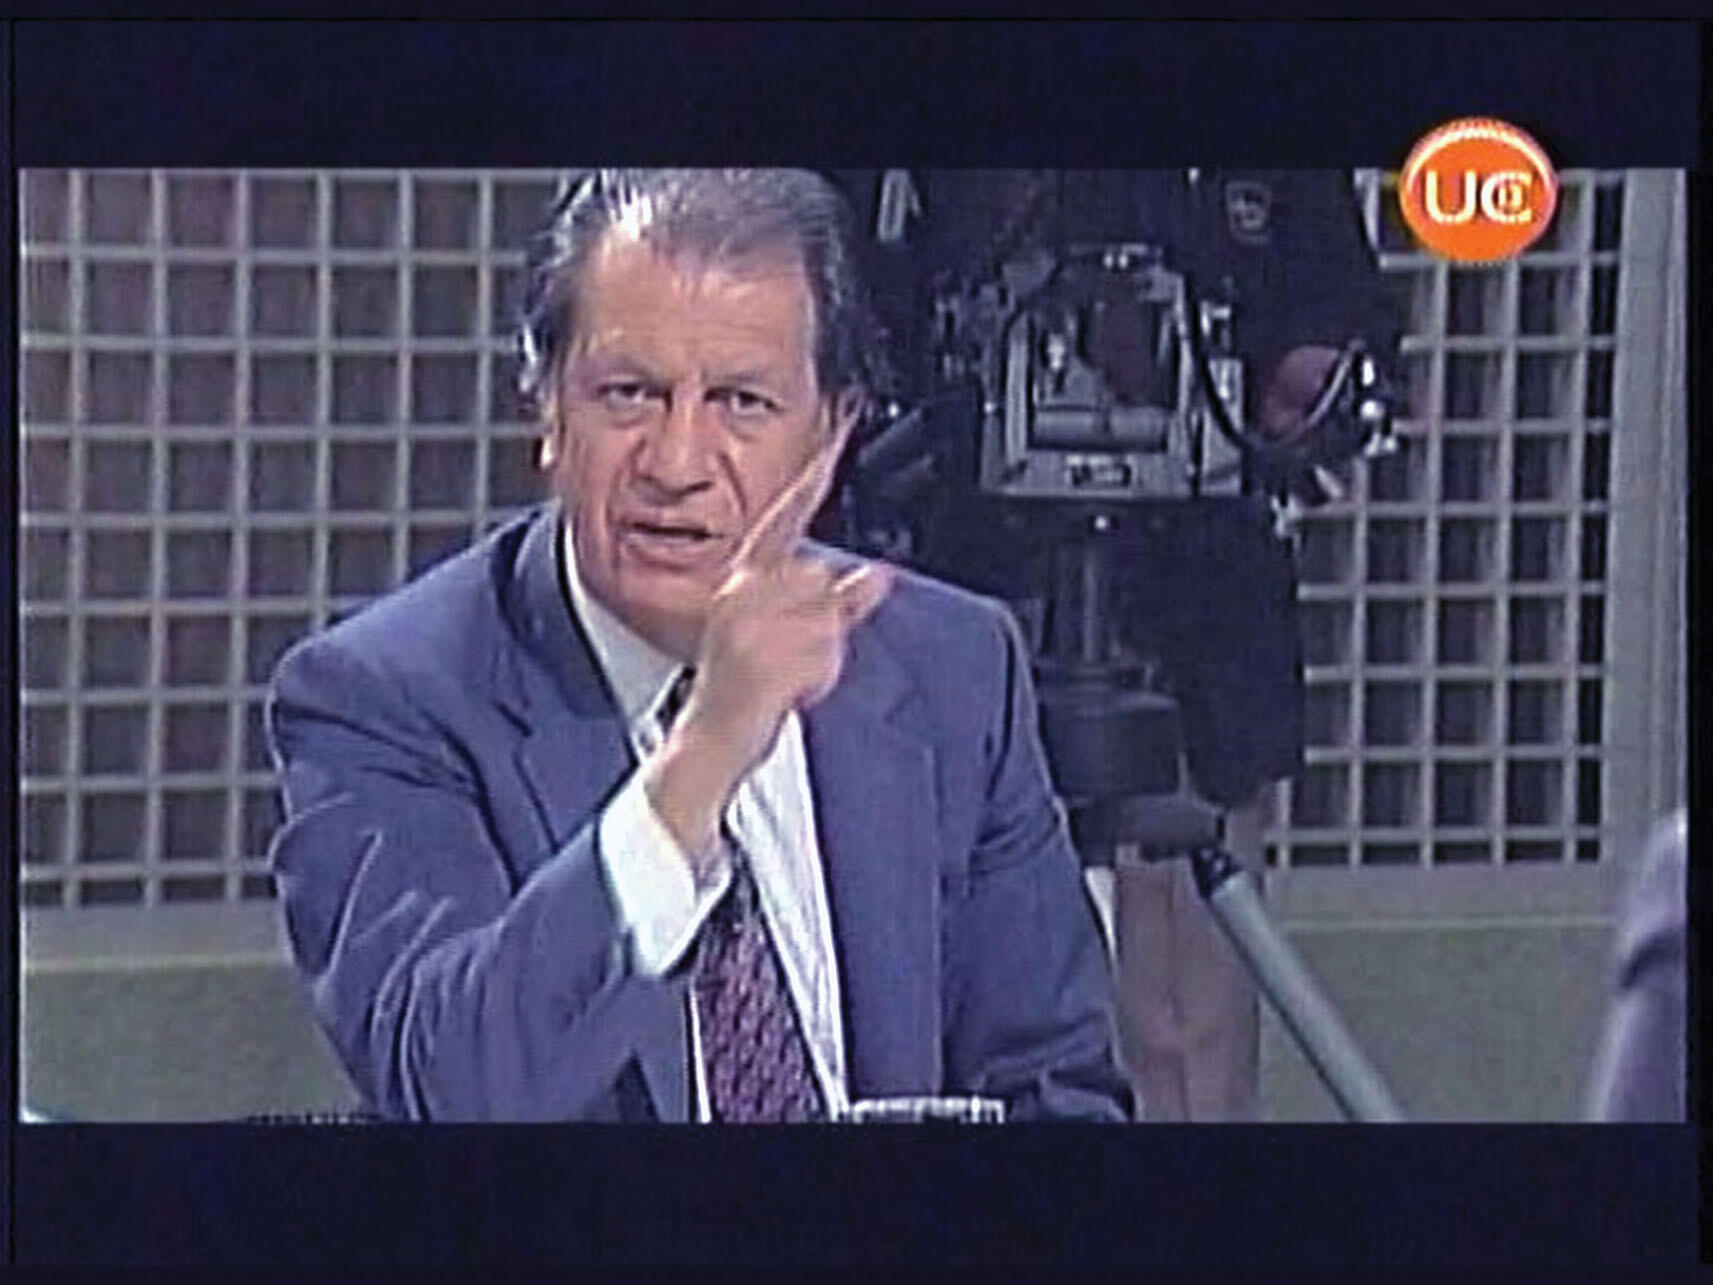 In 1988, Ricardo Lagos, the future president of Chile, demanded that Pinochet step down during a live television broadcast. (Photo courtesy of Rubén Ignacio Araneda Manríquez.)